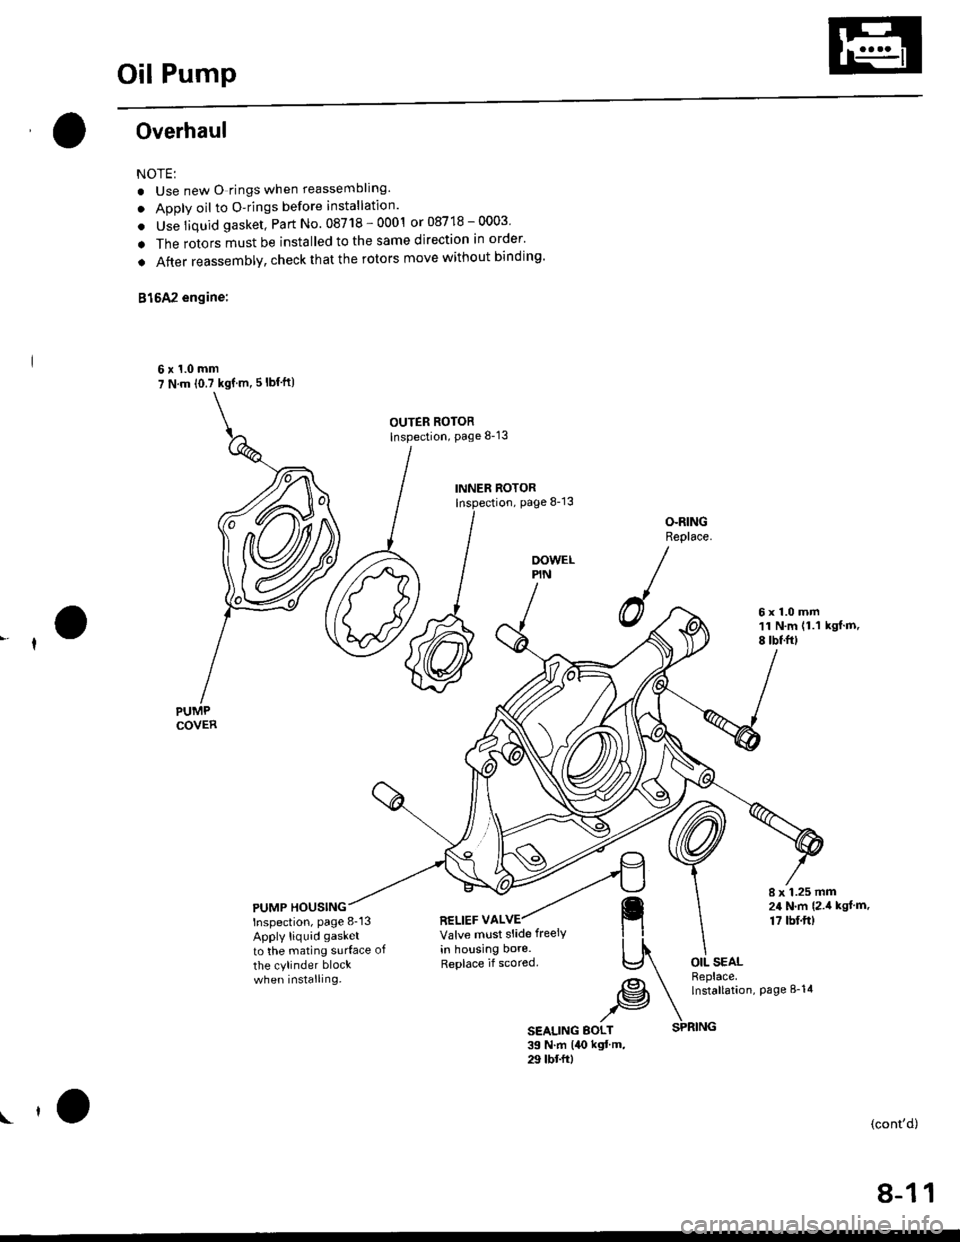 HONDA CIVIC 1998 6.G Workshop Manual Oil Pump
Overhaul
NOTE:
. Use new O rings when reassembllng.
. Apply oil to O-rings before installation.
. Use liquid gasket, Part No. 08718 - 0001 or 08718 - 0003
. The rotors must be installed to th